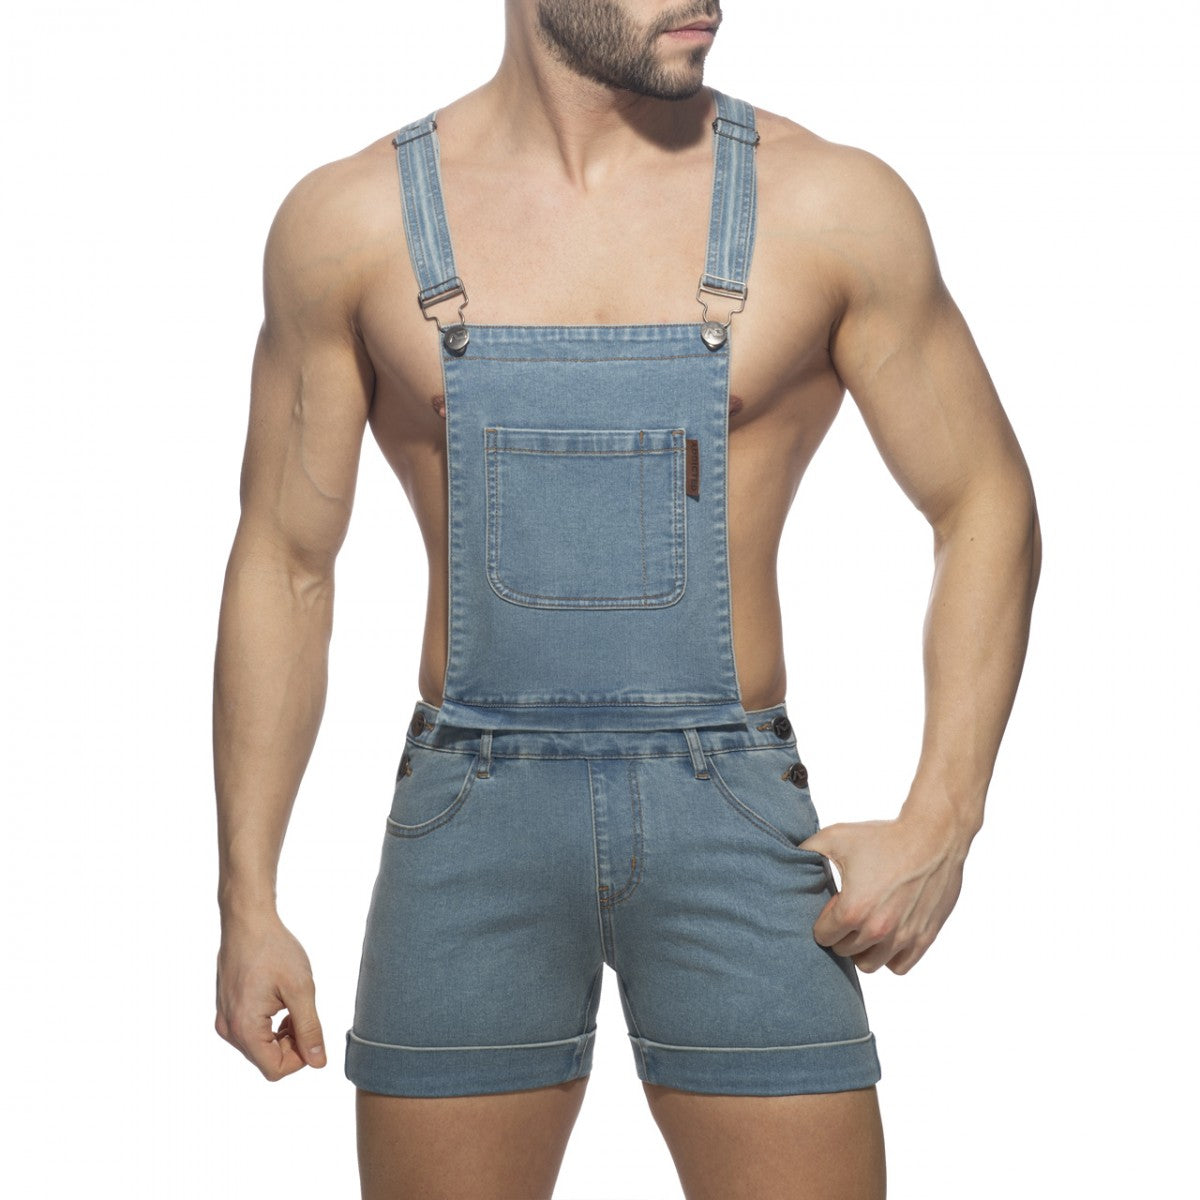 REMOVABLE JEAN OVERALLS - DealByEthan.gay